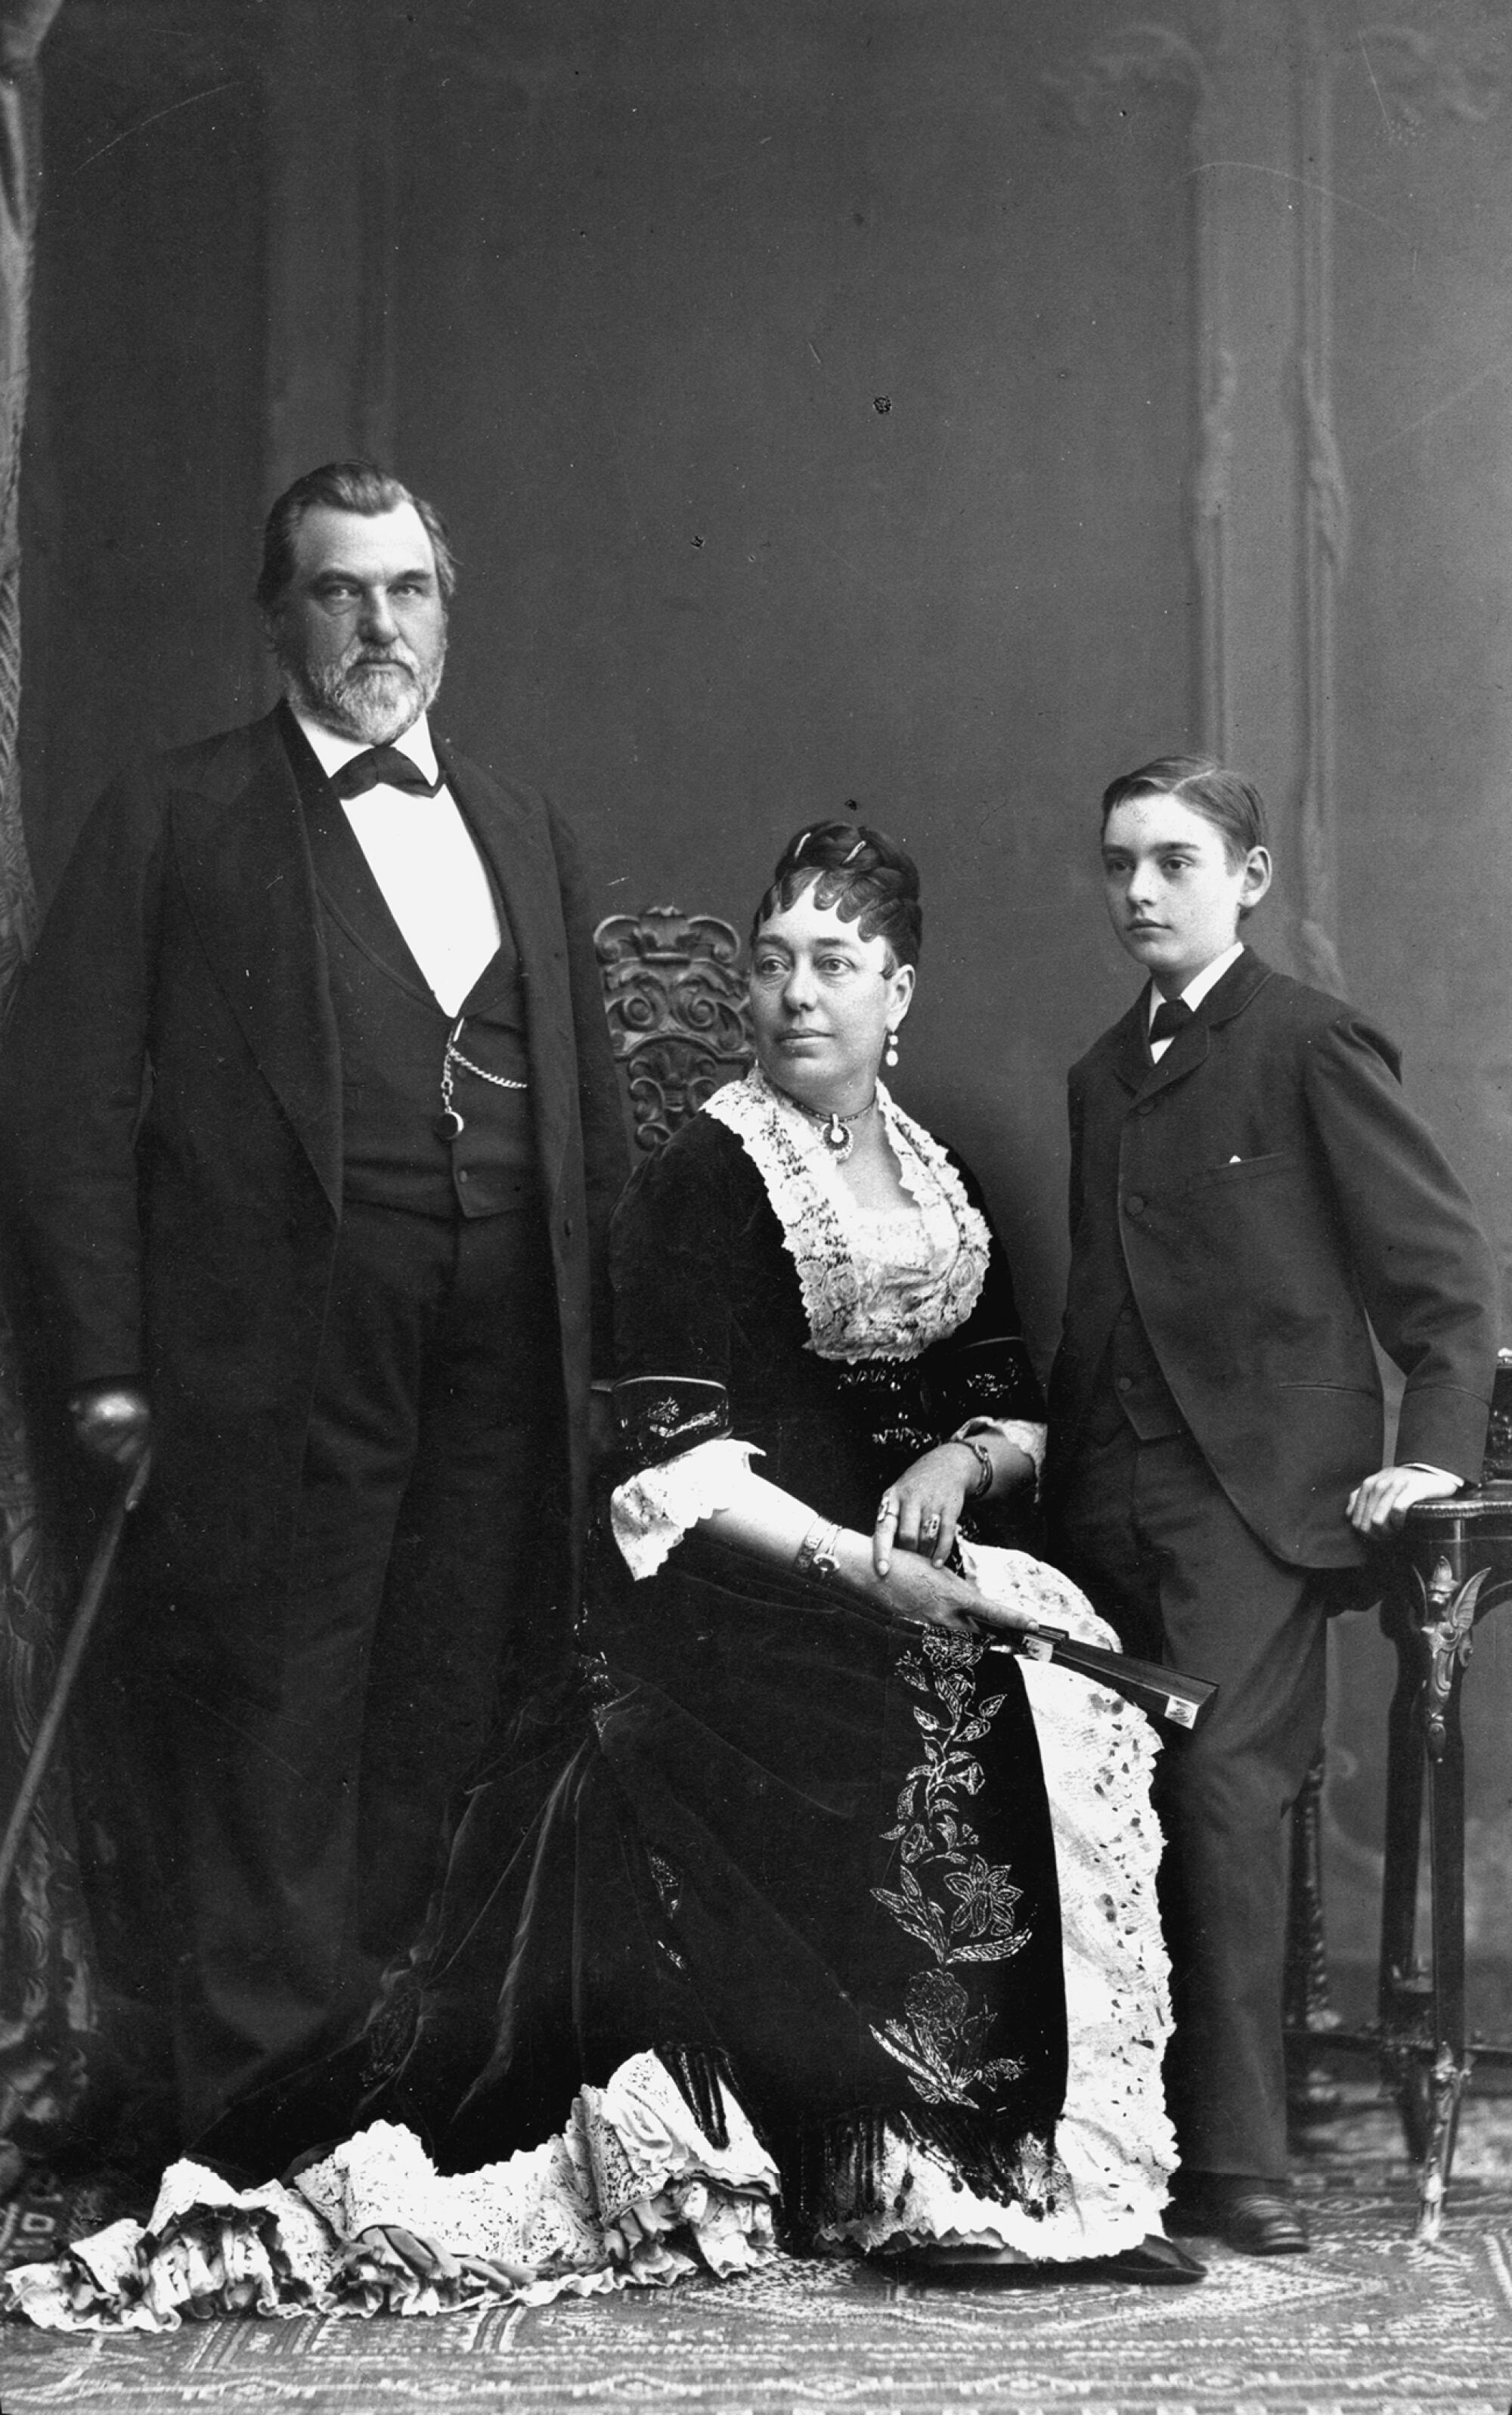 A black-and-white photo of a man, woman and young boy.